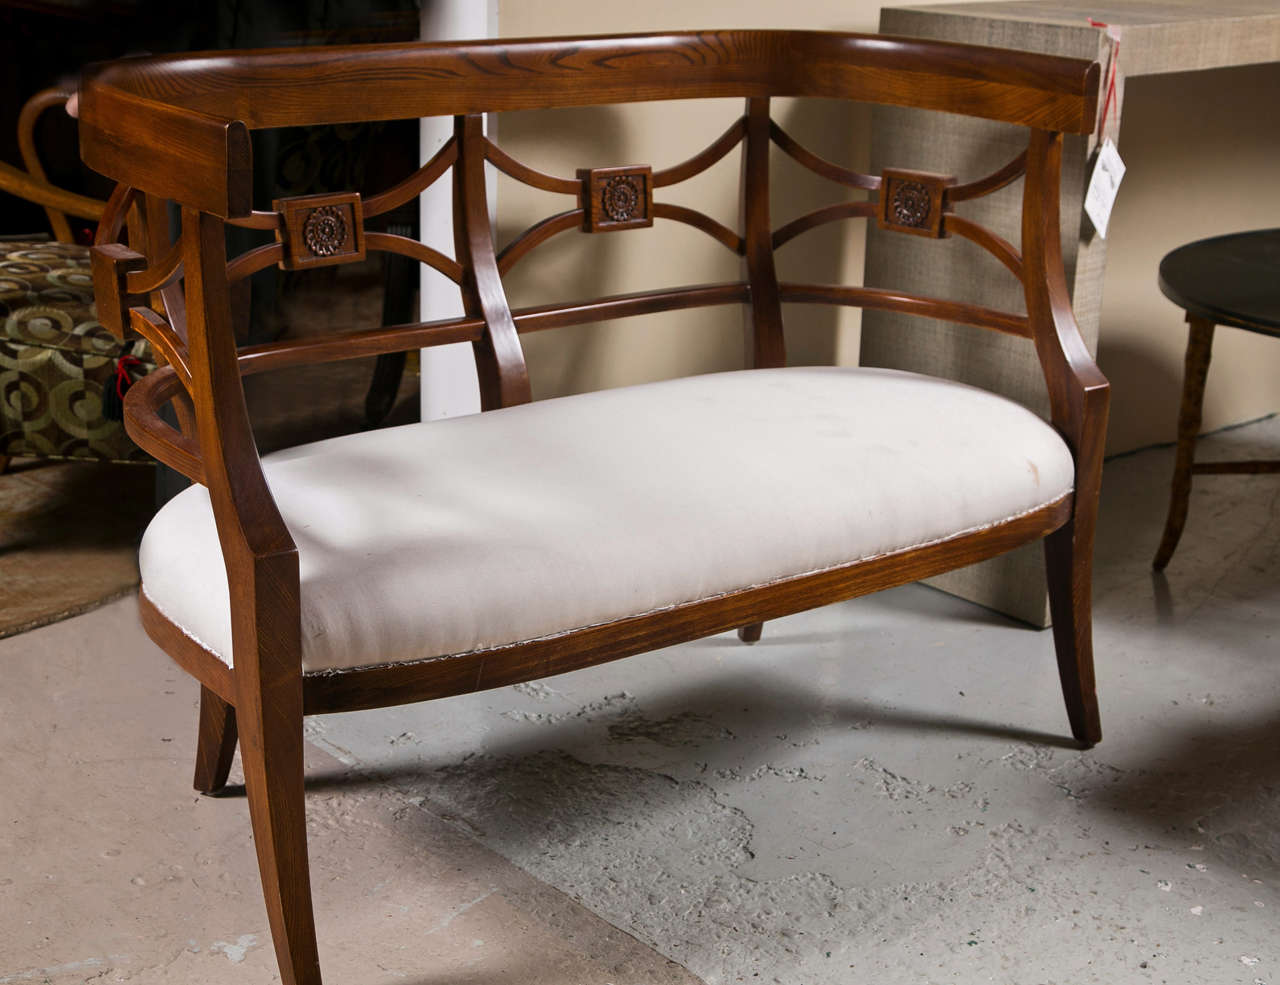 Pair of rosewood settees or loveseats in the Sheraton taste, circa 1970s, the concave-shaped back with patera-decorated back splats joint with a padded seat, raised on splayed legs.